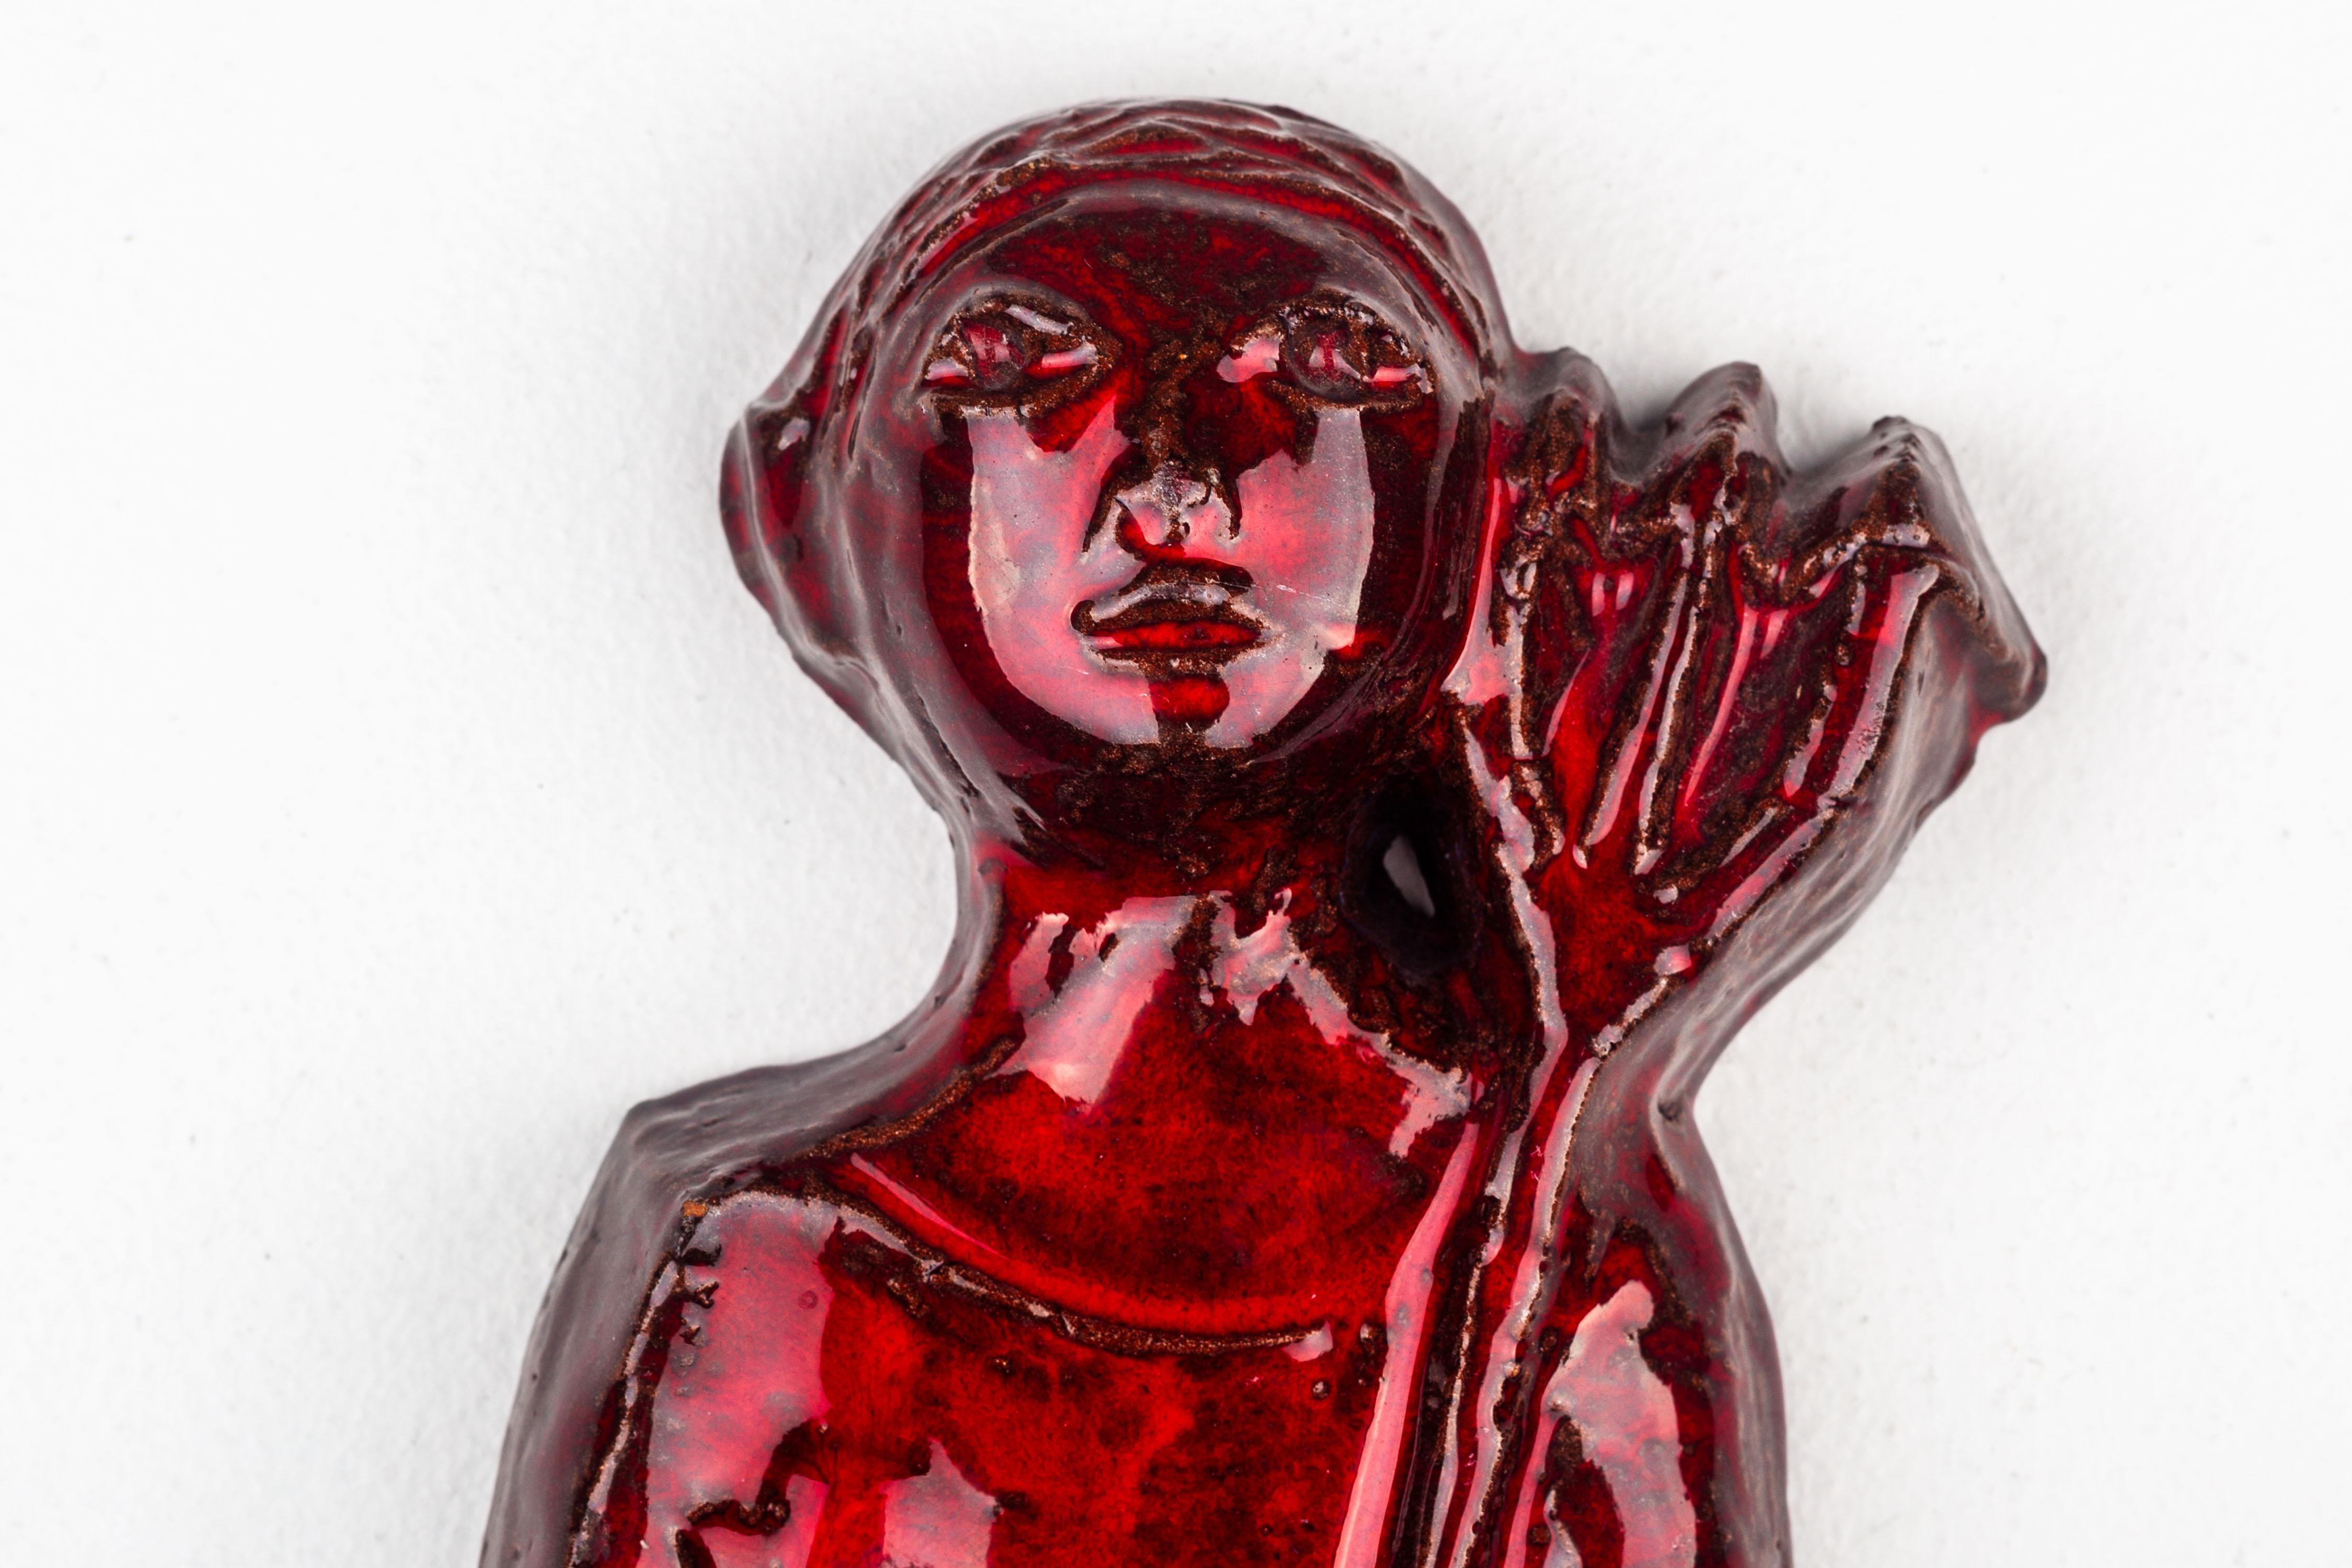 This ceramic wall decoration, a product of modernist Studio Pottery in Europe, portrays an architectural red devil holding a pitchfork amidst flames. The piece is characterized by vibrant red enamel tones, which shine through a super glossy clear